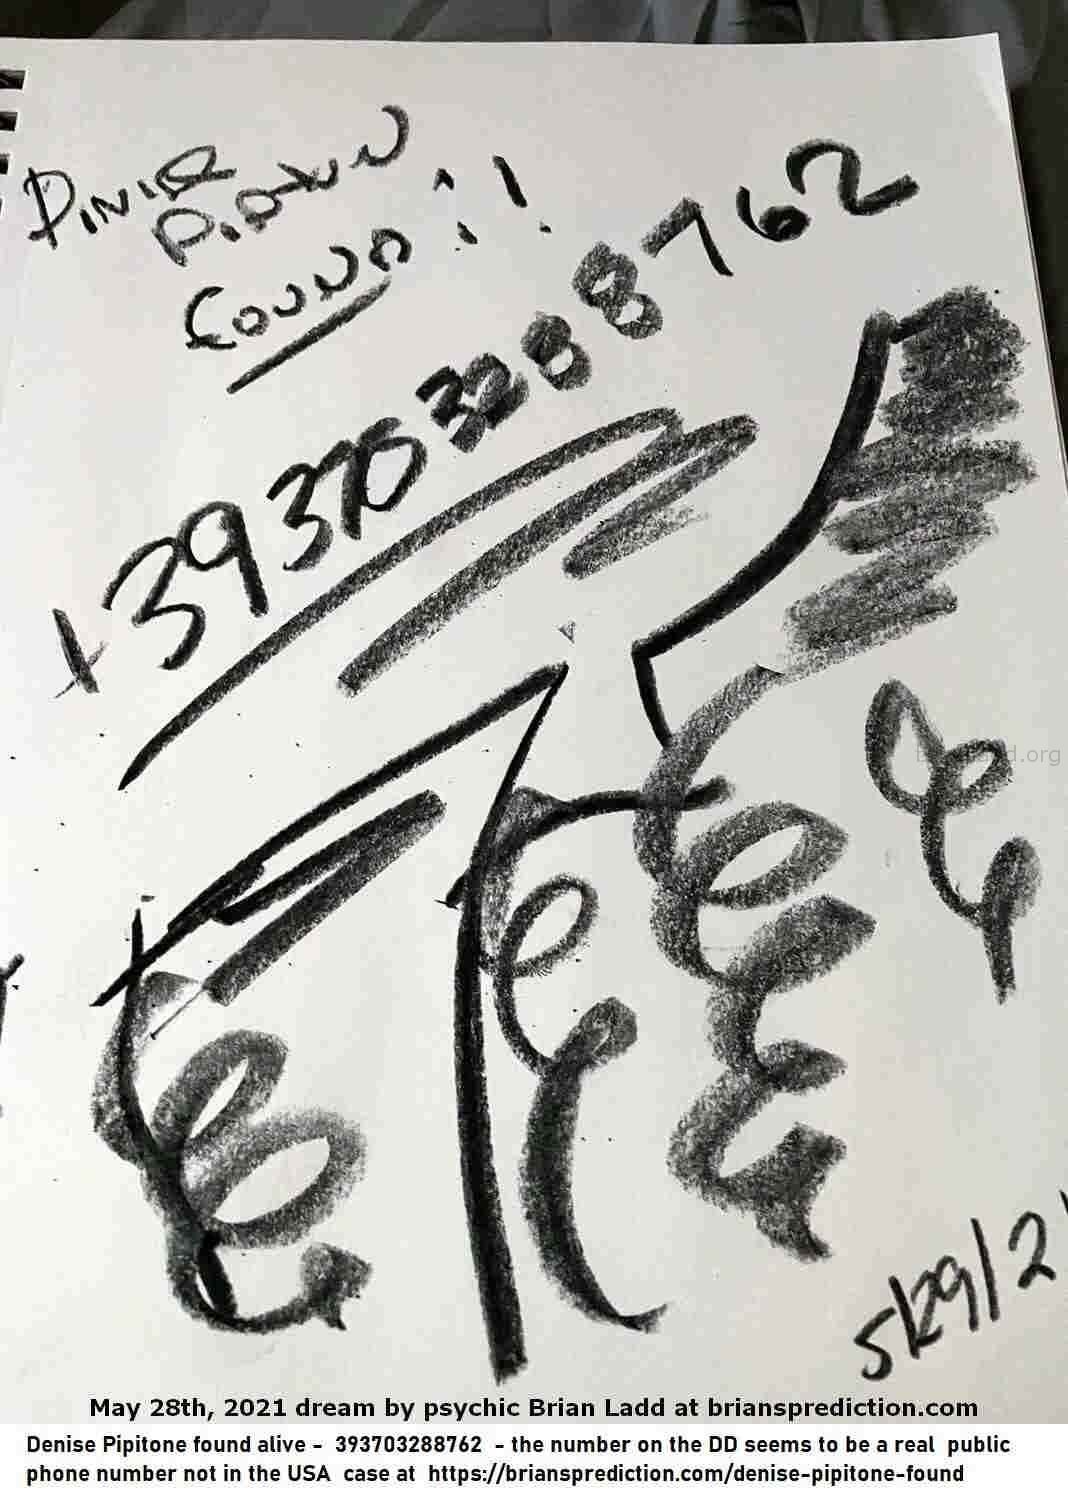 14937 28 May 2021 6 - Denise Pipitone Found Alive -  393703288762  - The Number On The Dd Seems To Be A Real  Public Pho...
Denise Pipitone Found Alive -  393703288762  - The Number On The Dd Seems To Be A Real  Public Phone Number Not In The Usa.  Case At   https://briansprediction.com/Denise-Pipitone-found
